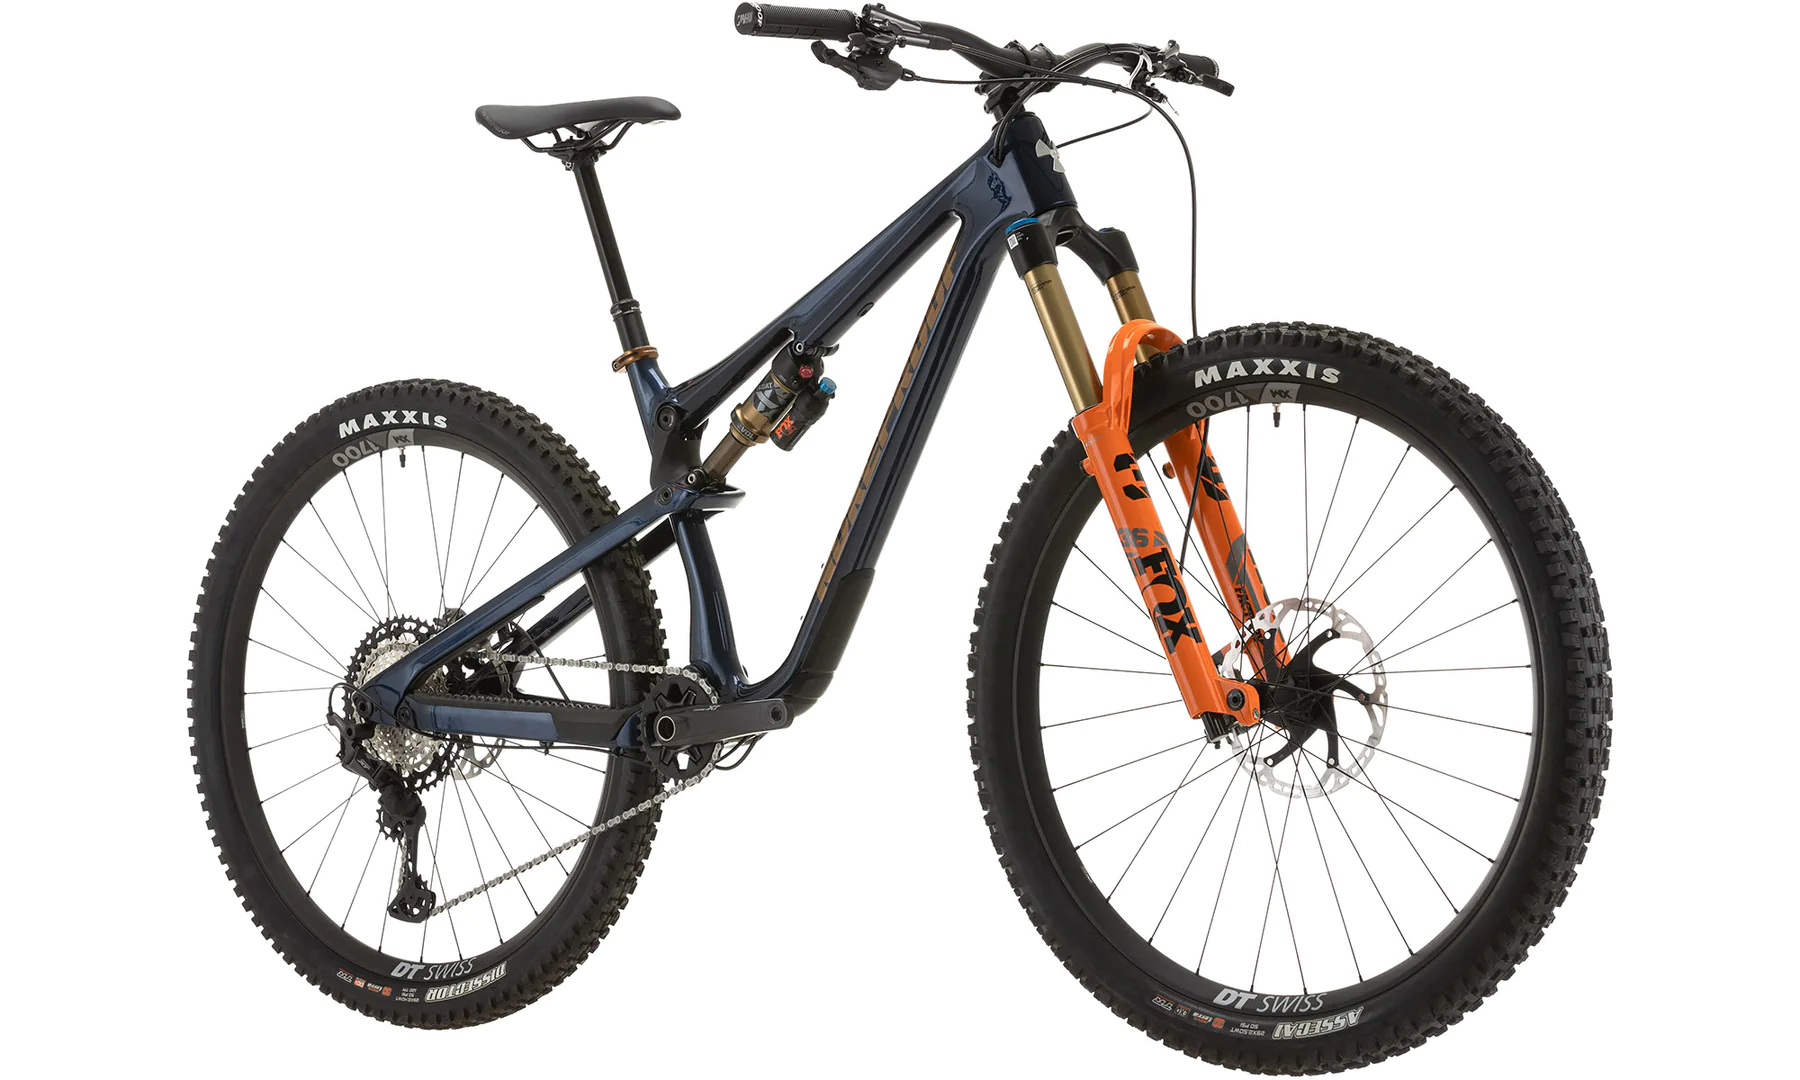 Nukeproof Reactor 290 Factory Complete available at The Bike Company